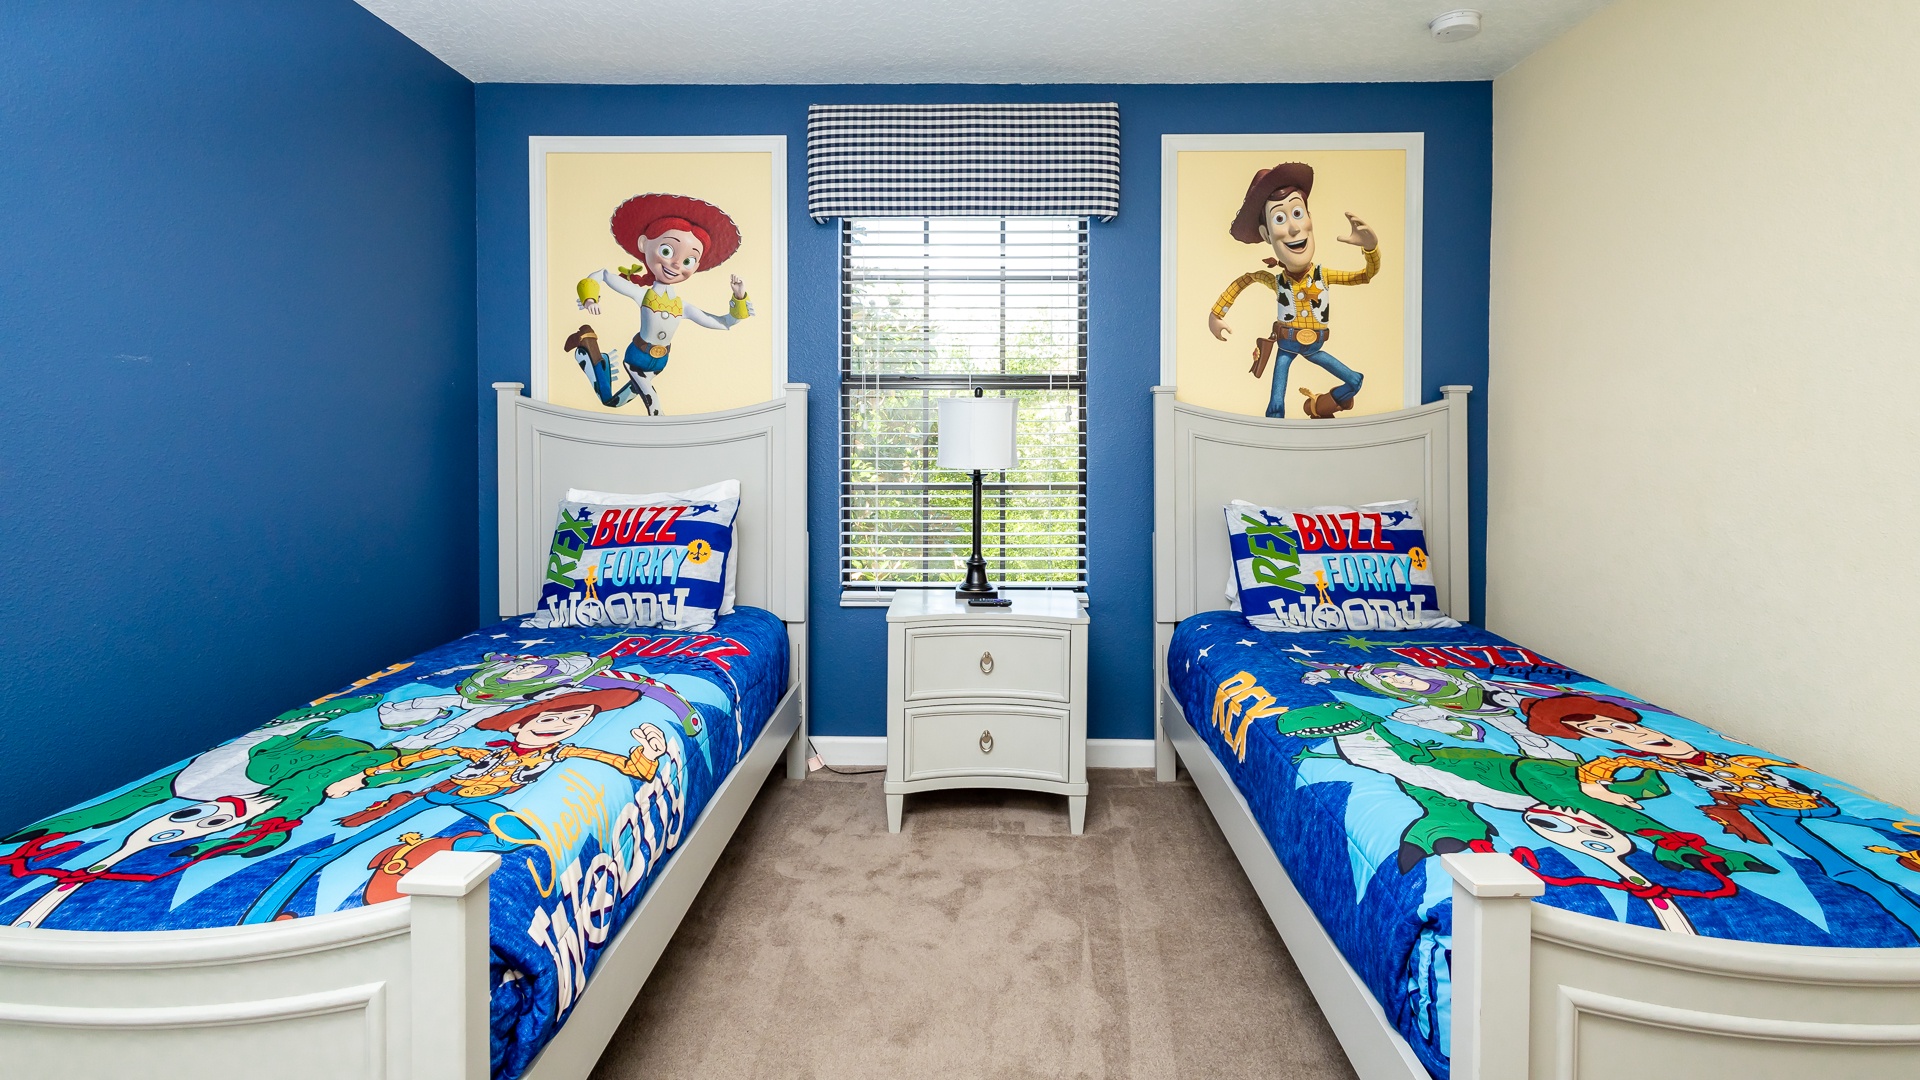 Indulge in whimsical dreams with playful themed bedrooms